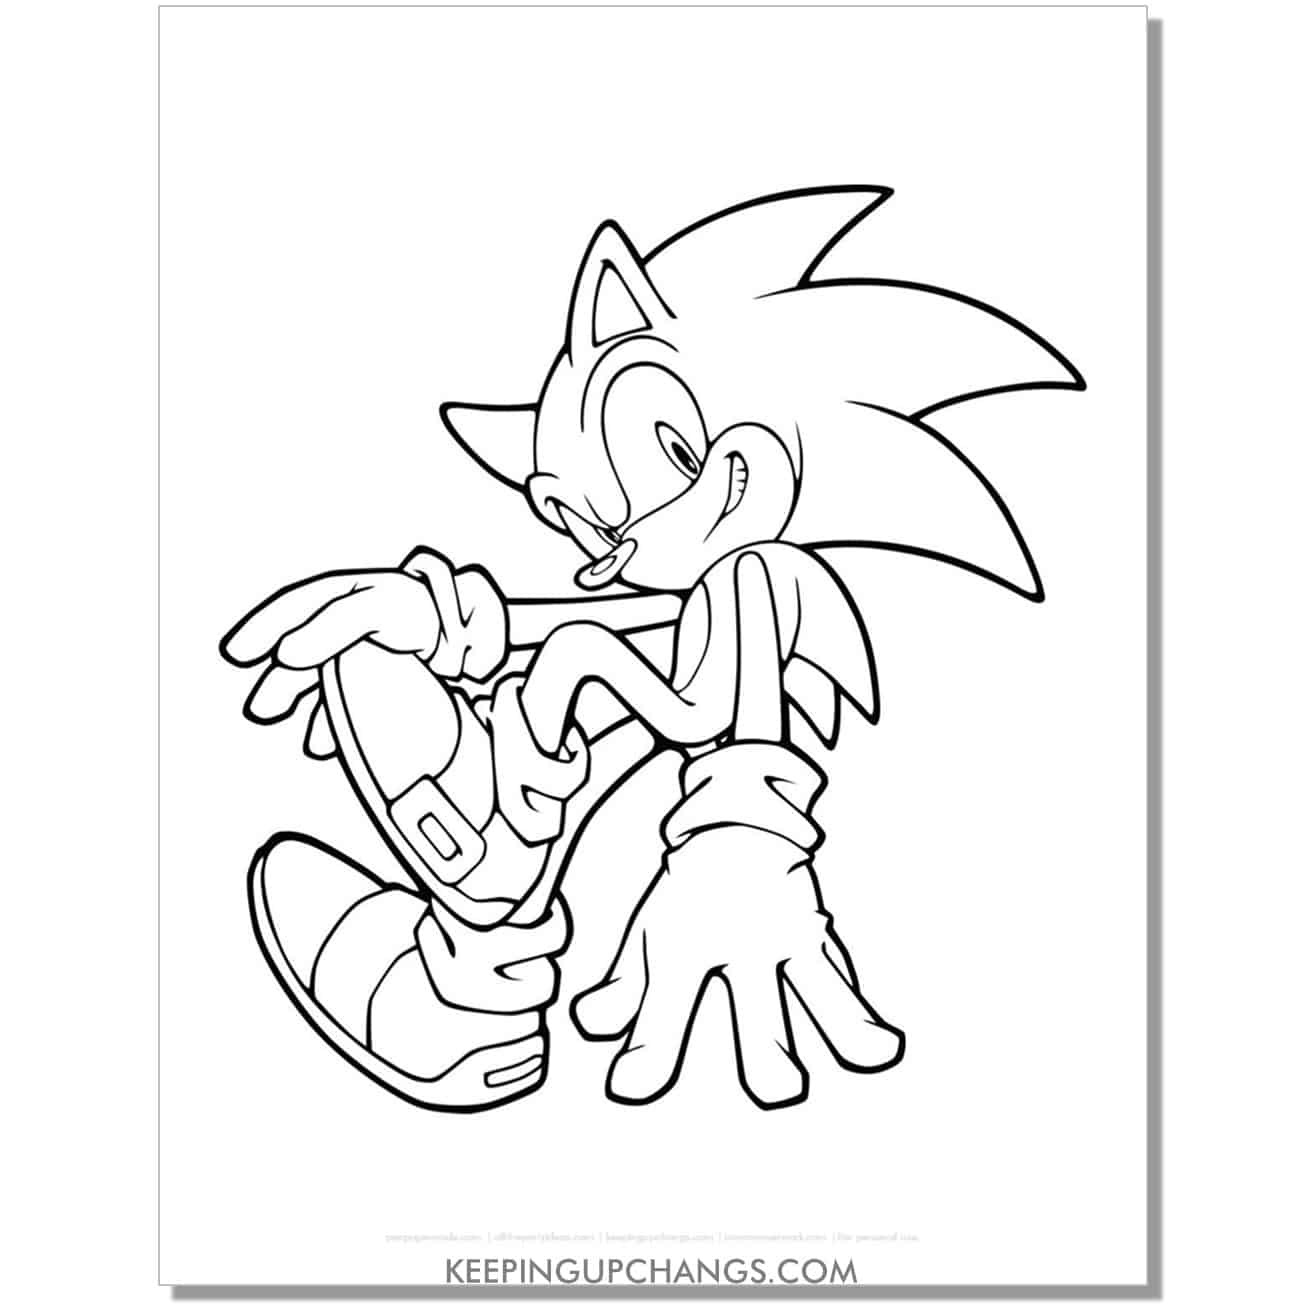 sonic looking back with arm on ground coloring page.